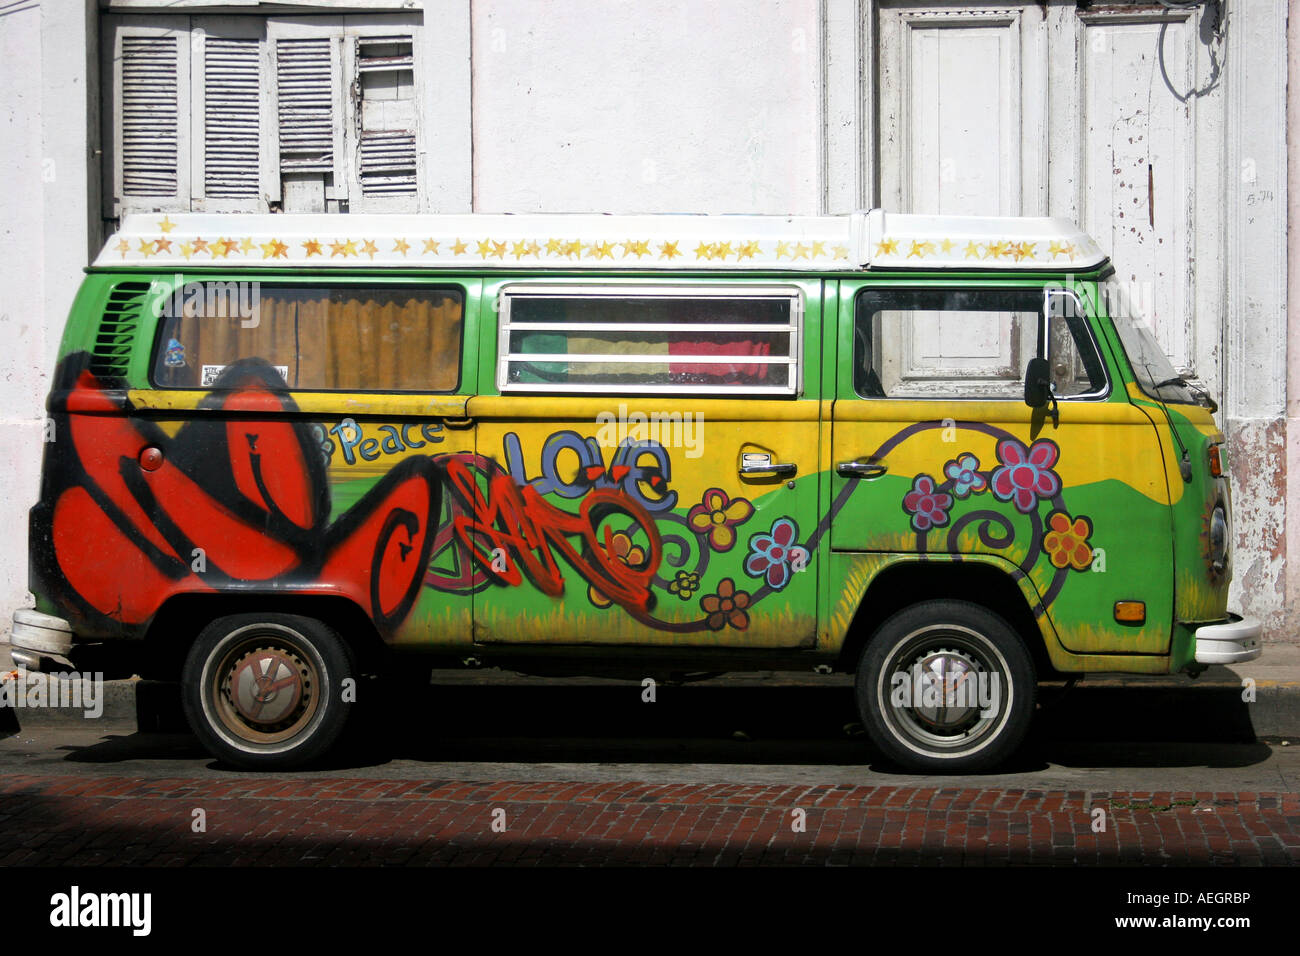 This is a common sight in the area, a colourful, colorful, minivan, trolley, artistically painted by its owner. Stock Photo